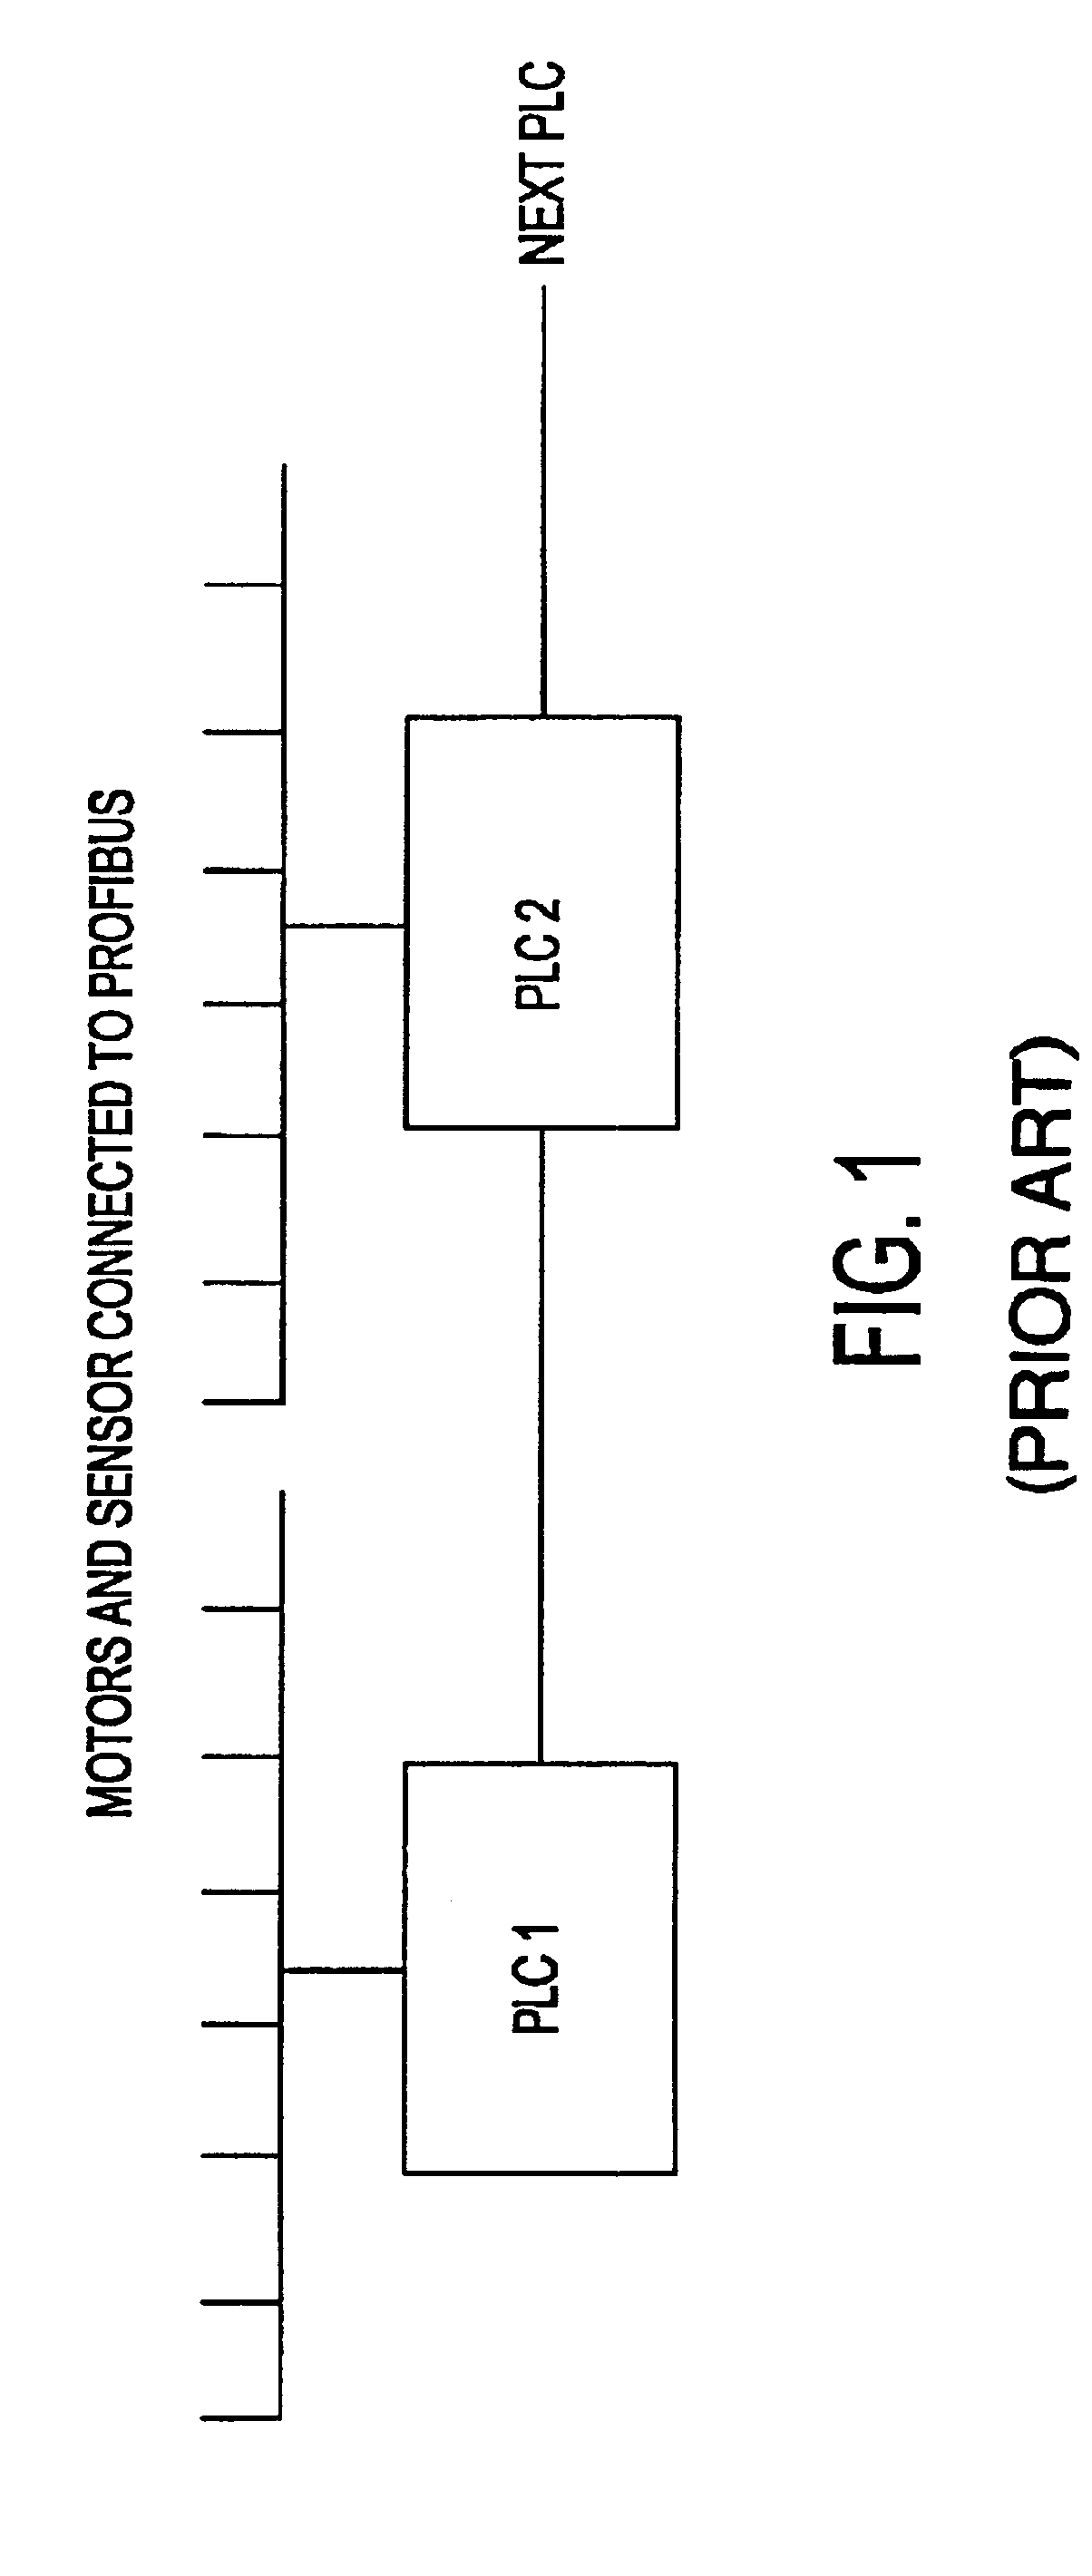 Distributed control system architecture and method for a material transport system